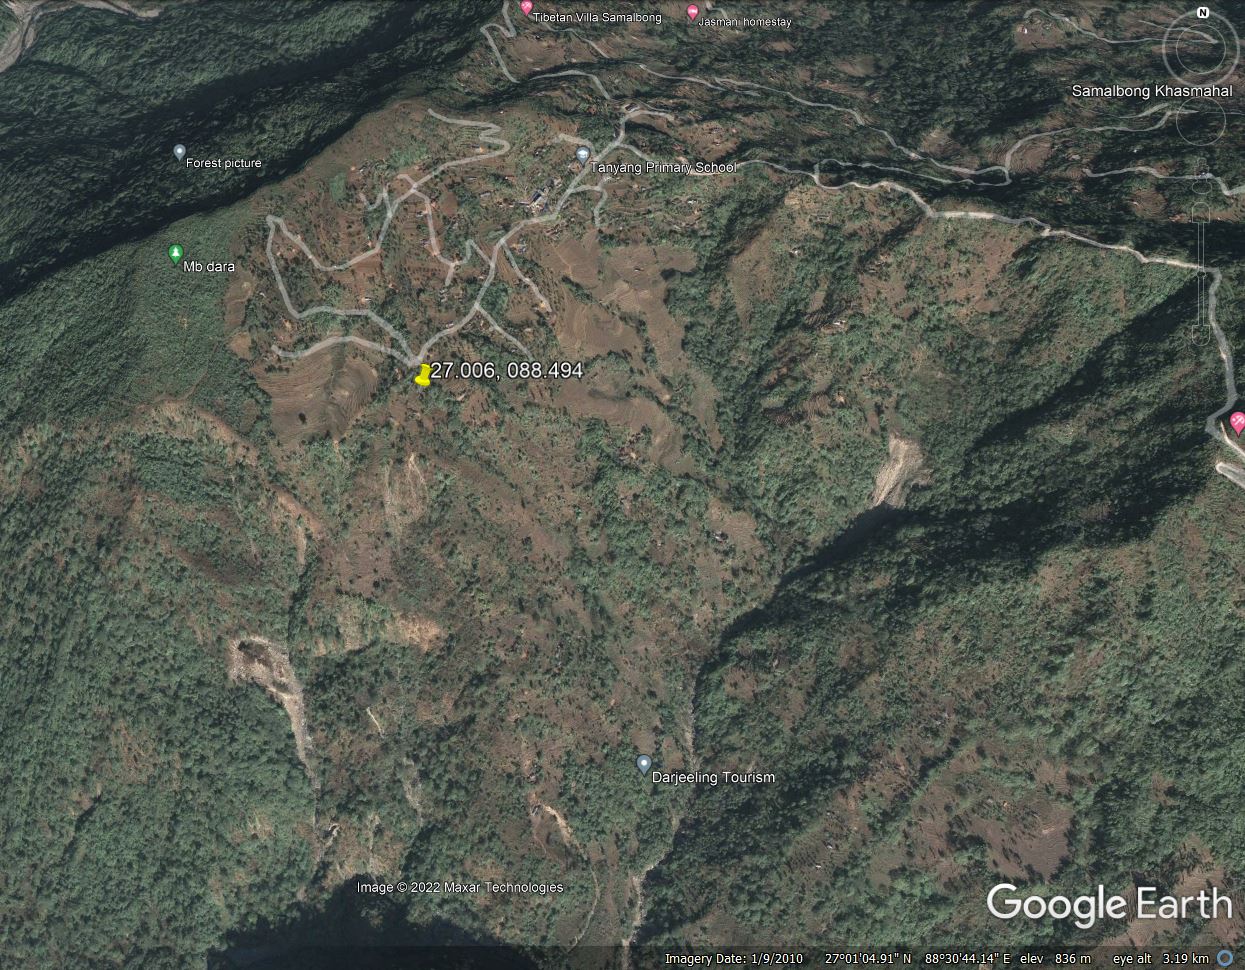 The village of Tanyang in northern India, as seen on Google Earth in January 2010.